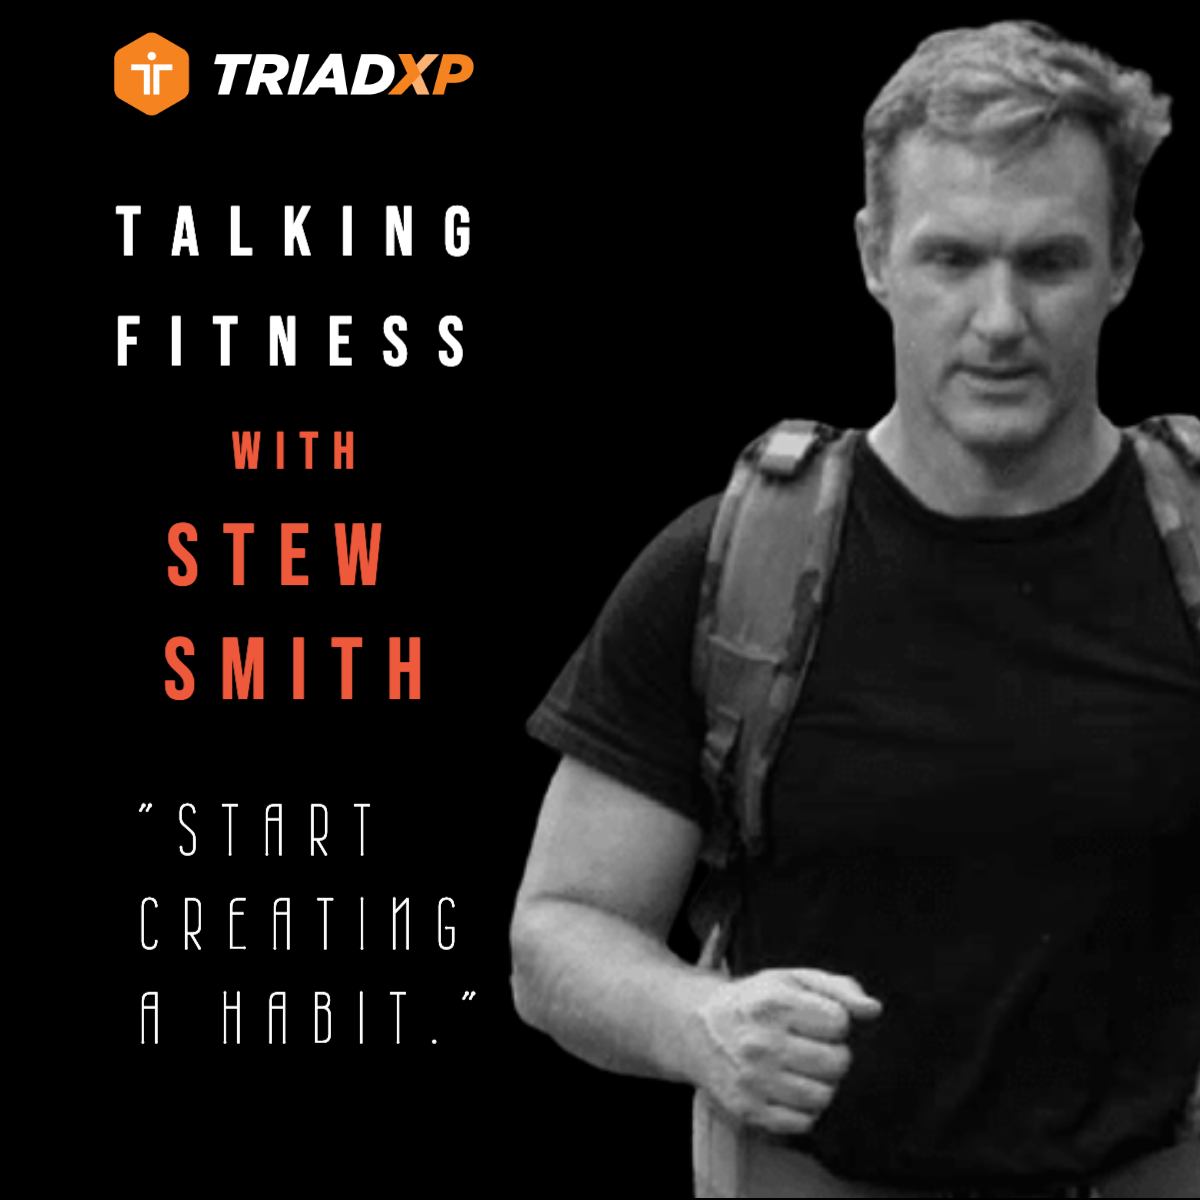 Stew Smith Interview: Building Habits and Mental Toughness